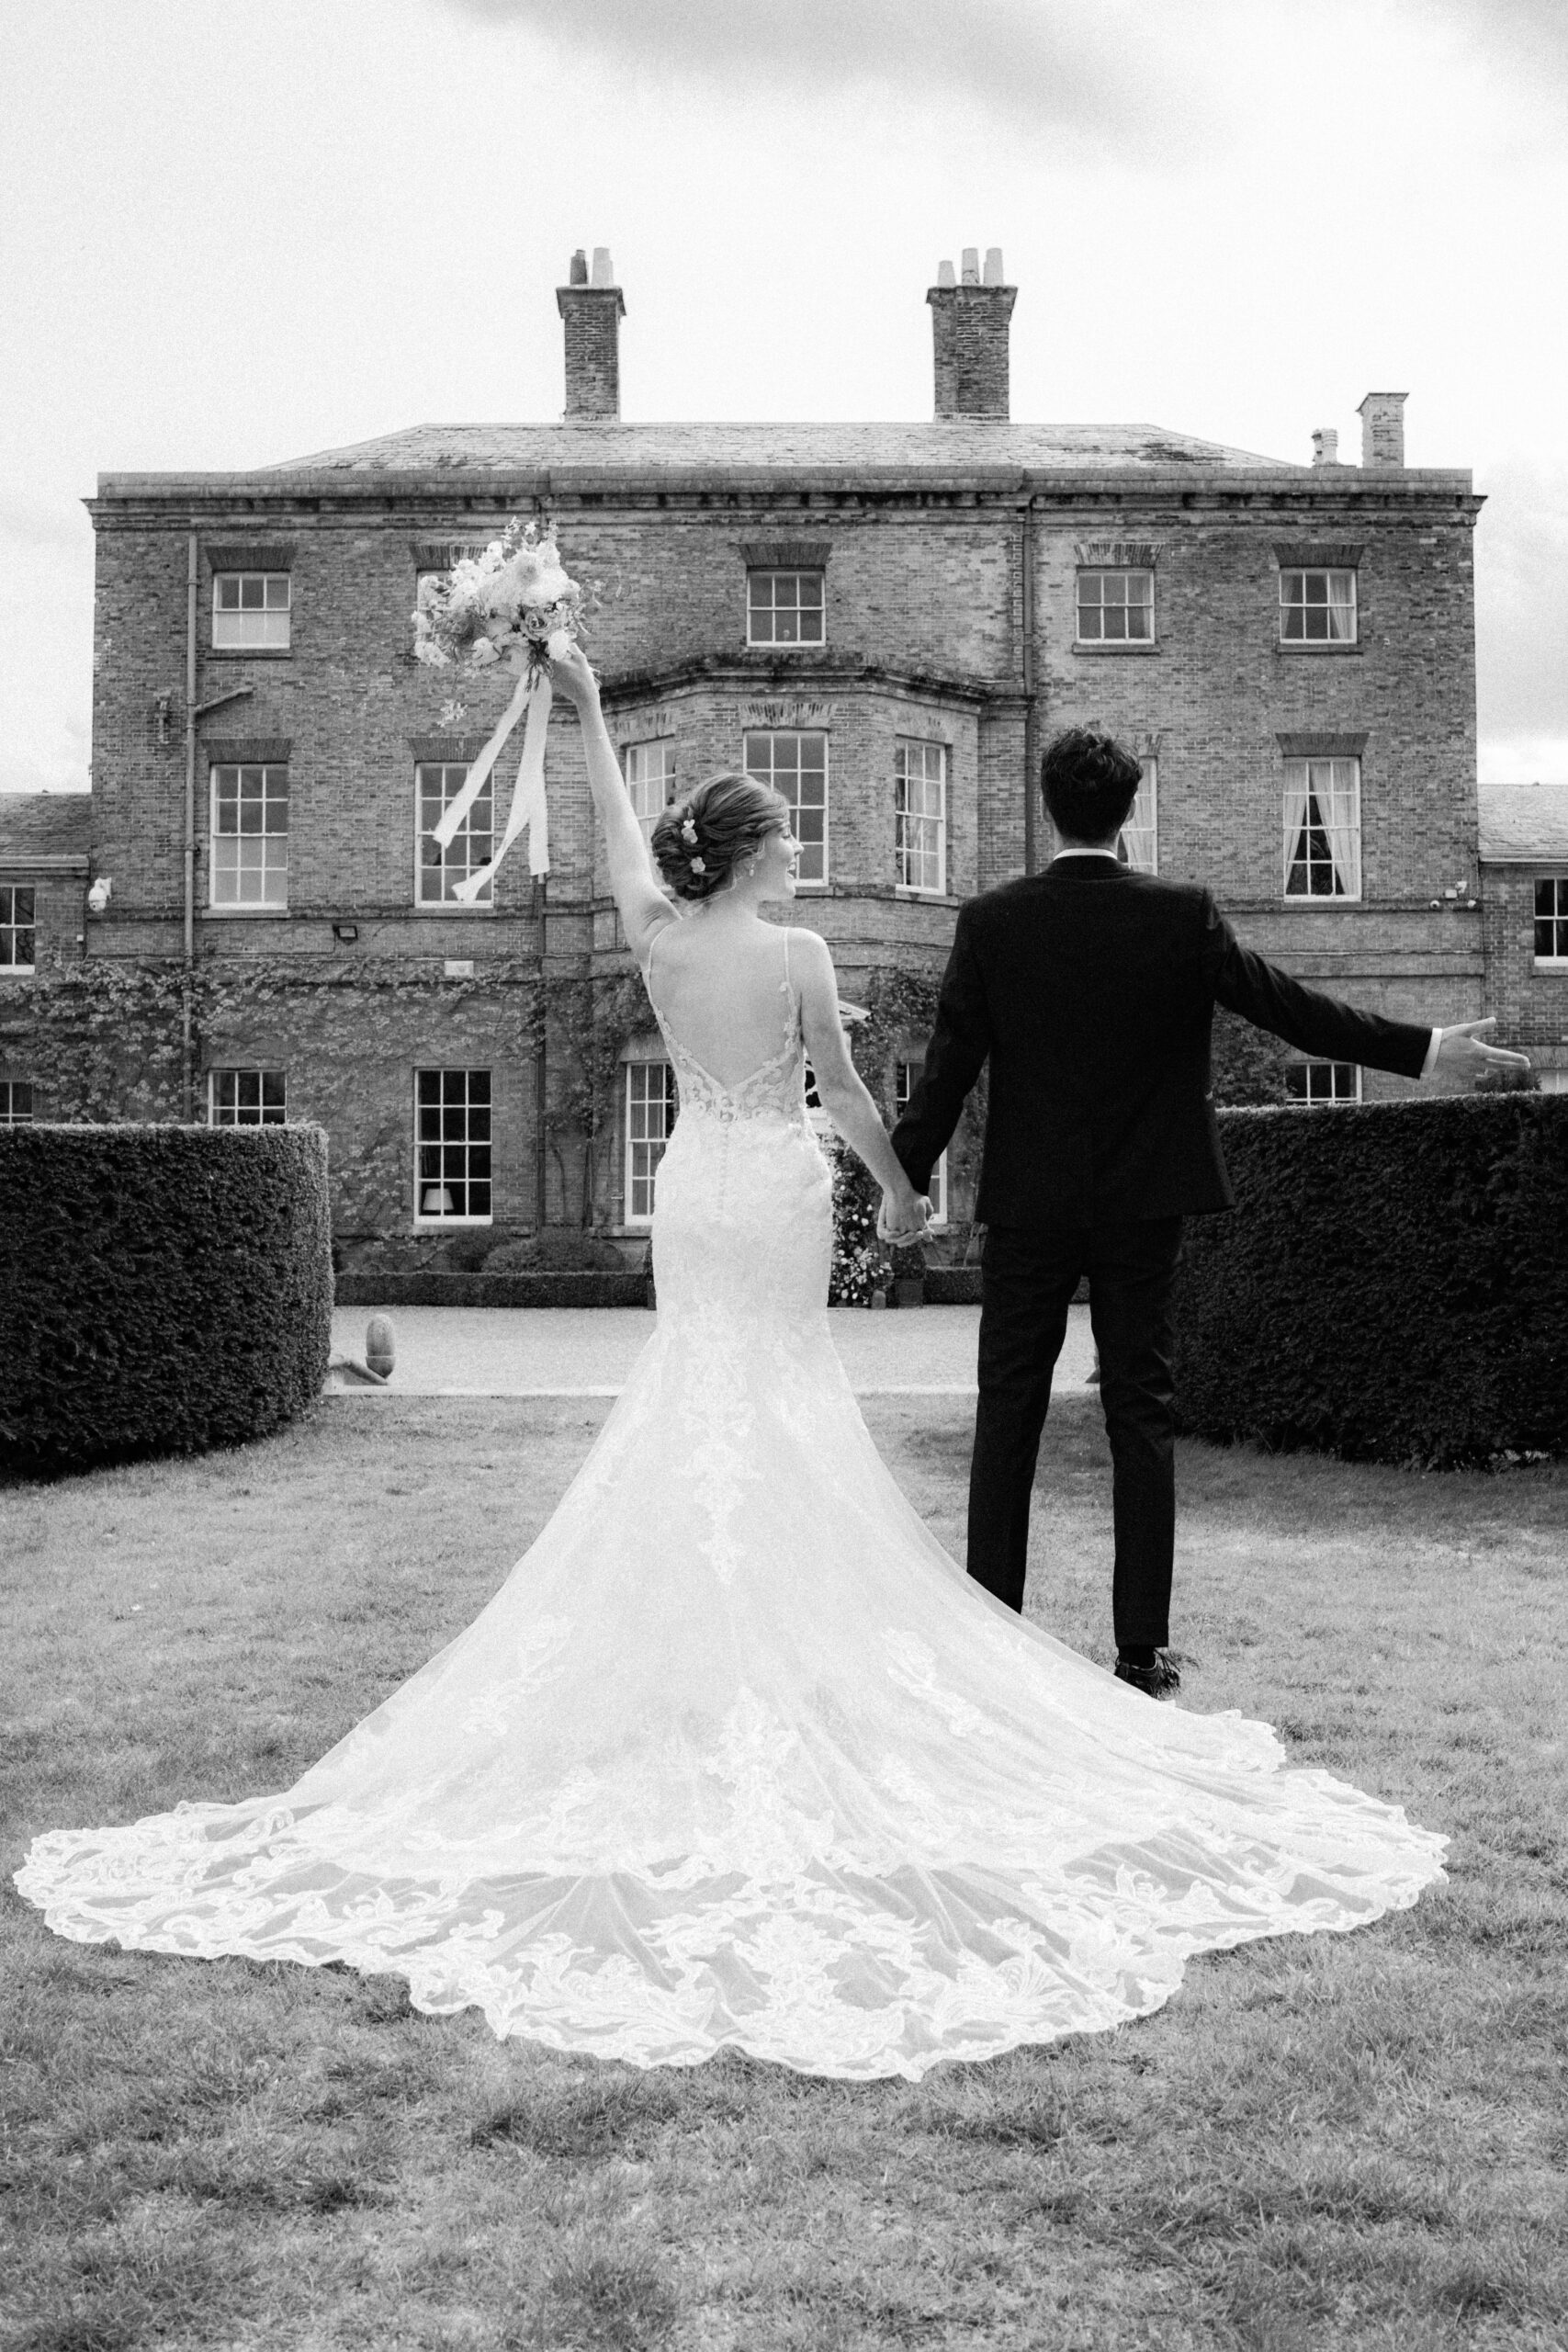 Wedding Destinations in the North of England: The Best Wedding Suit To Wear To Each